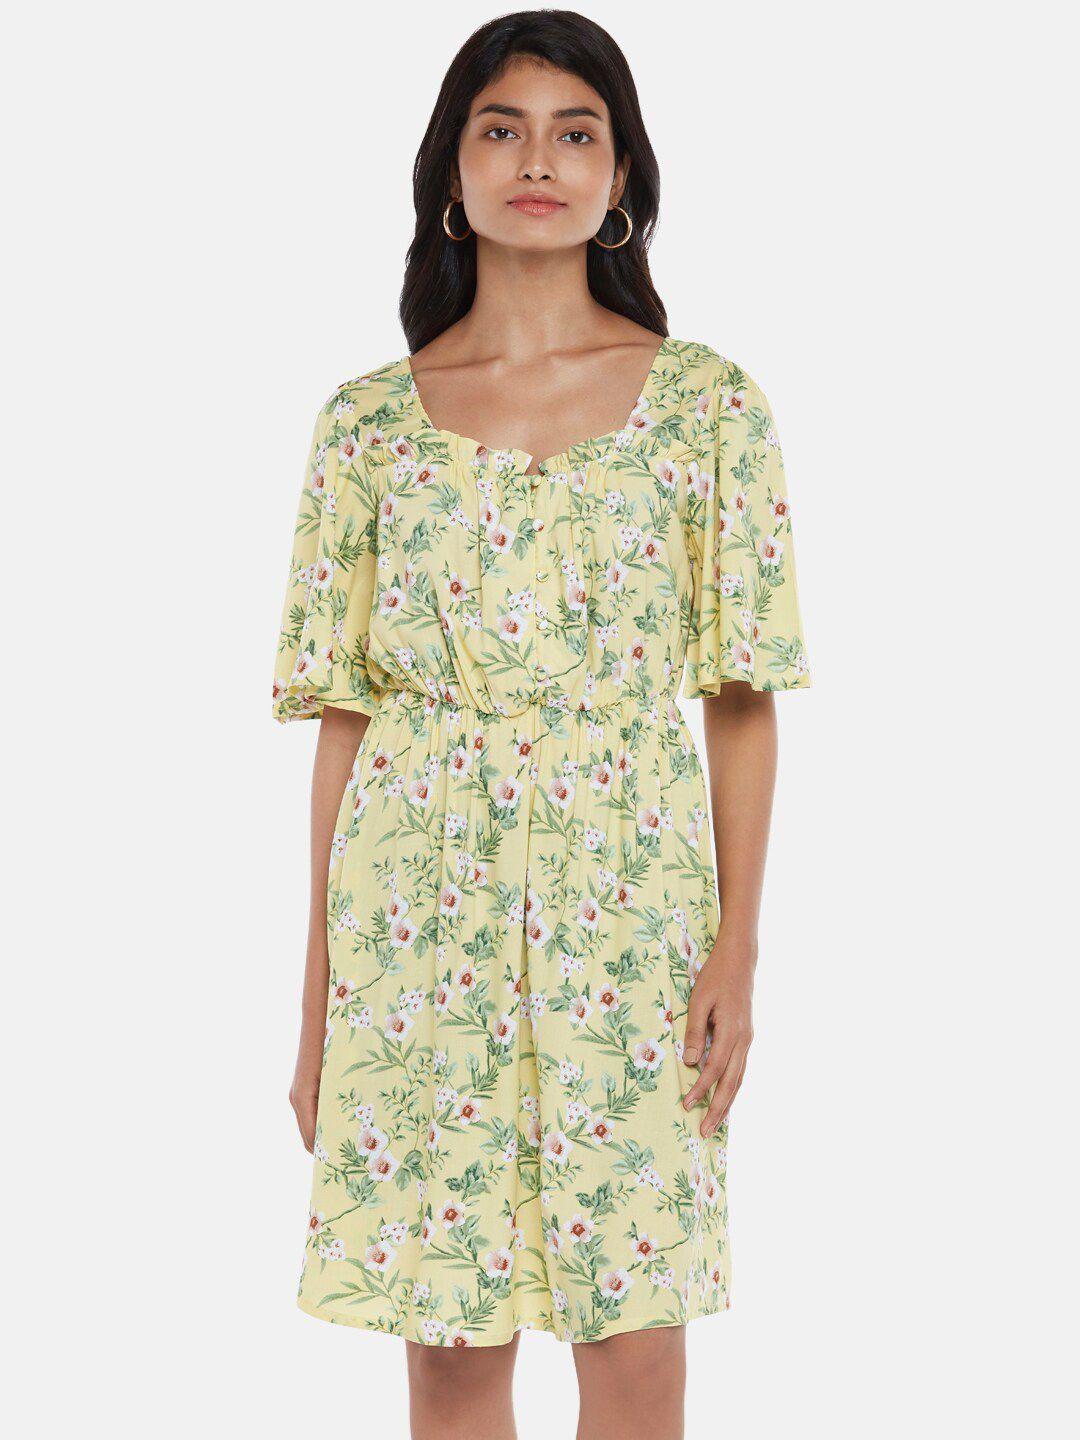 honey by pantaloons yellow floral a-line dress